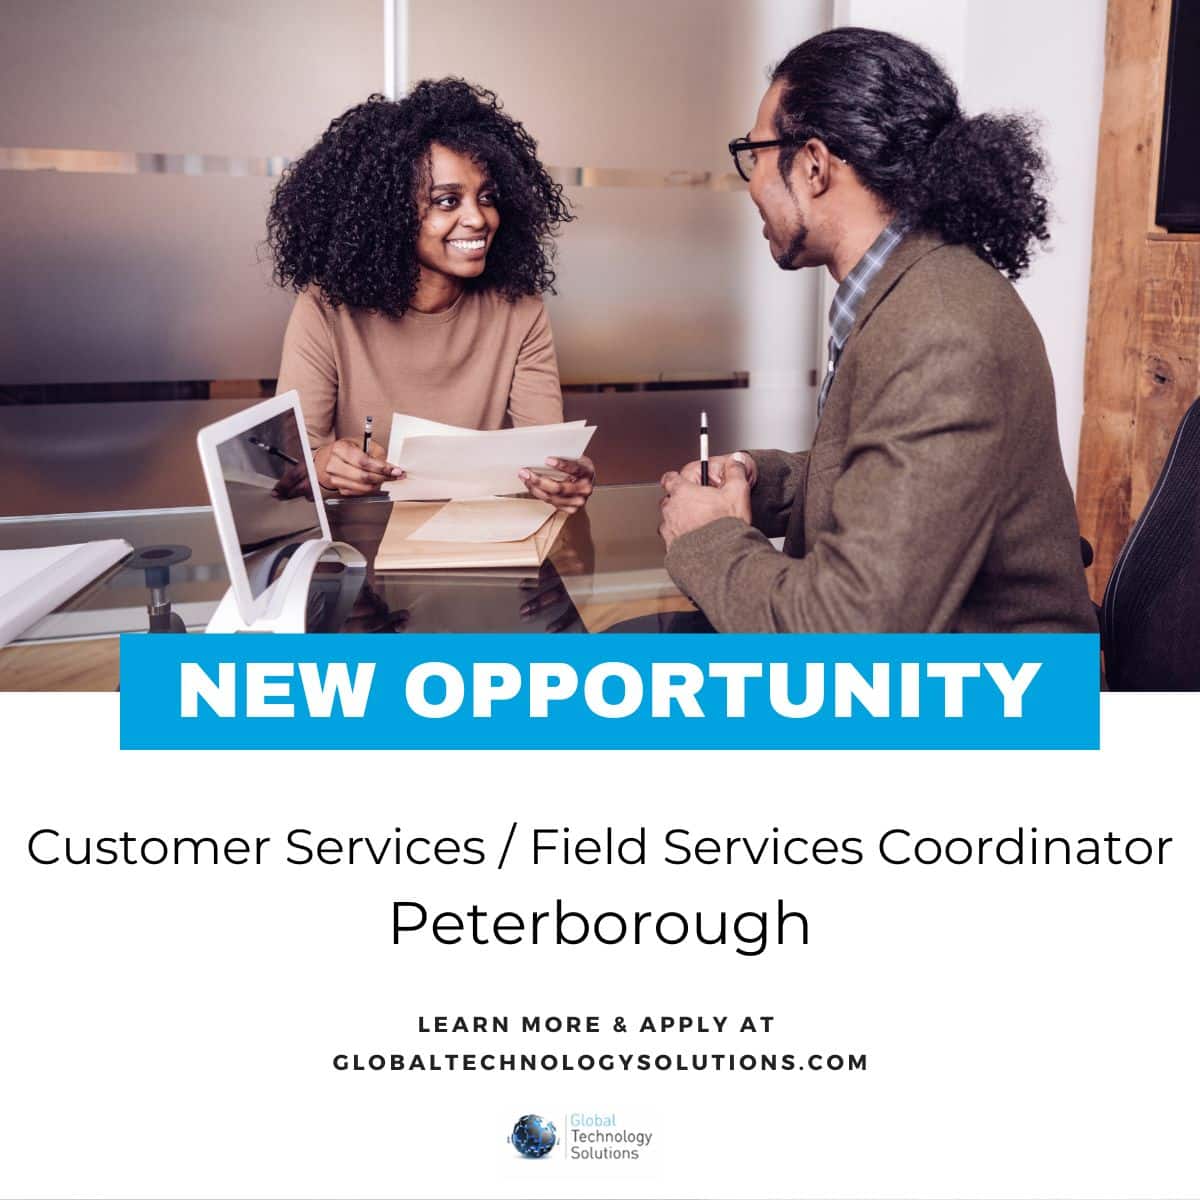 Someone interview for a job in Peterborough.